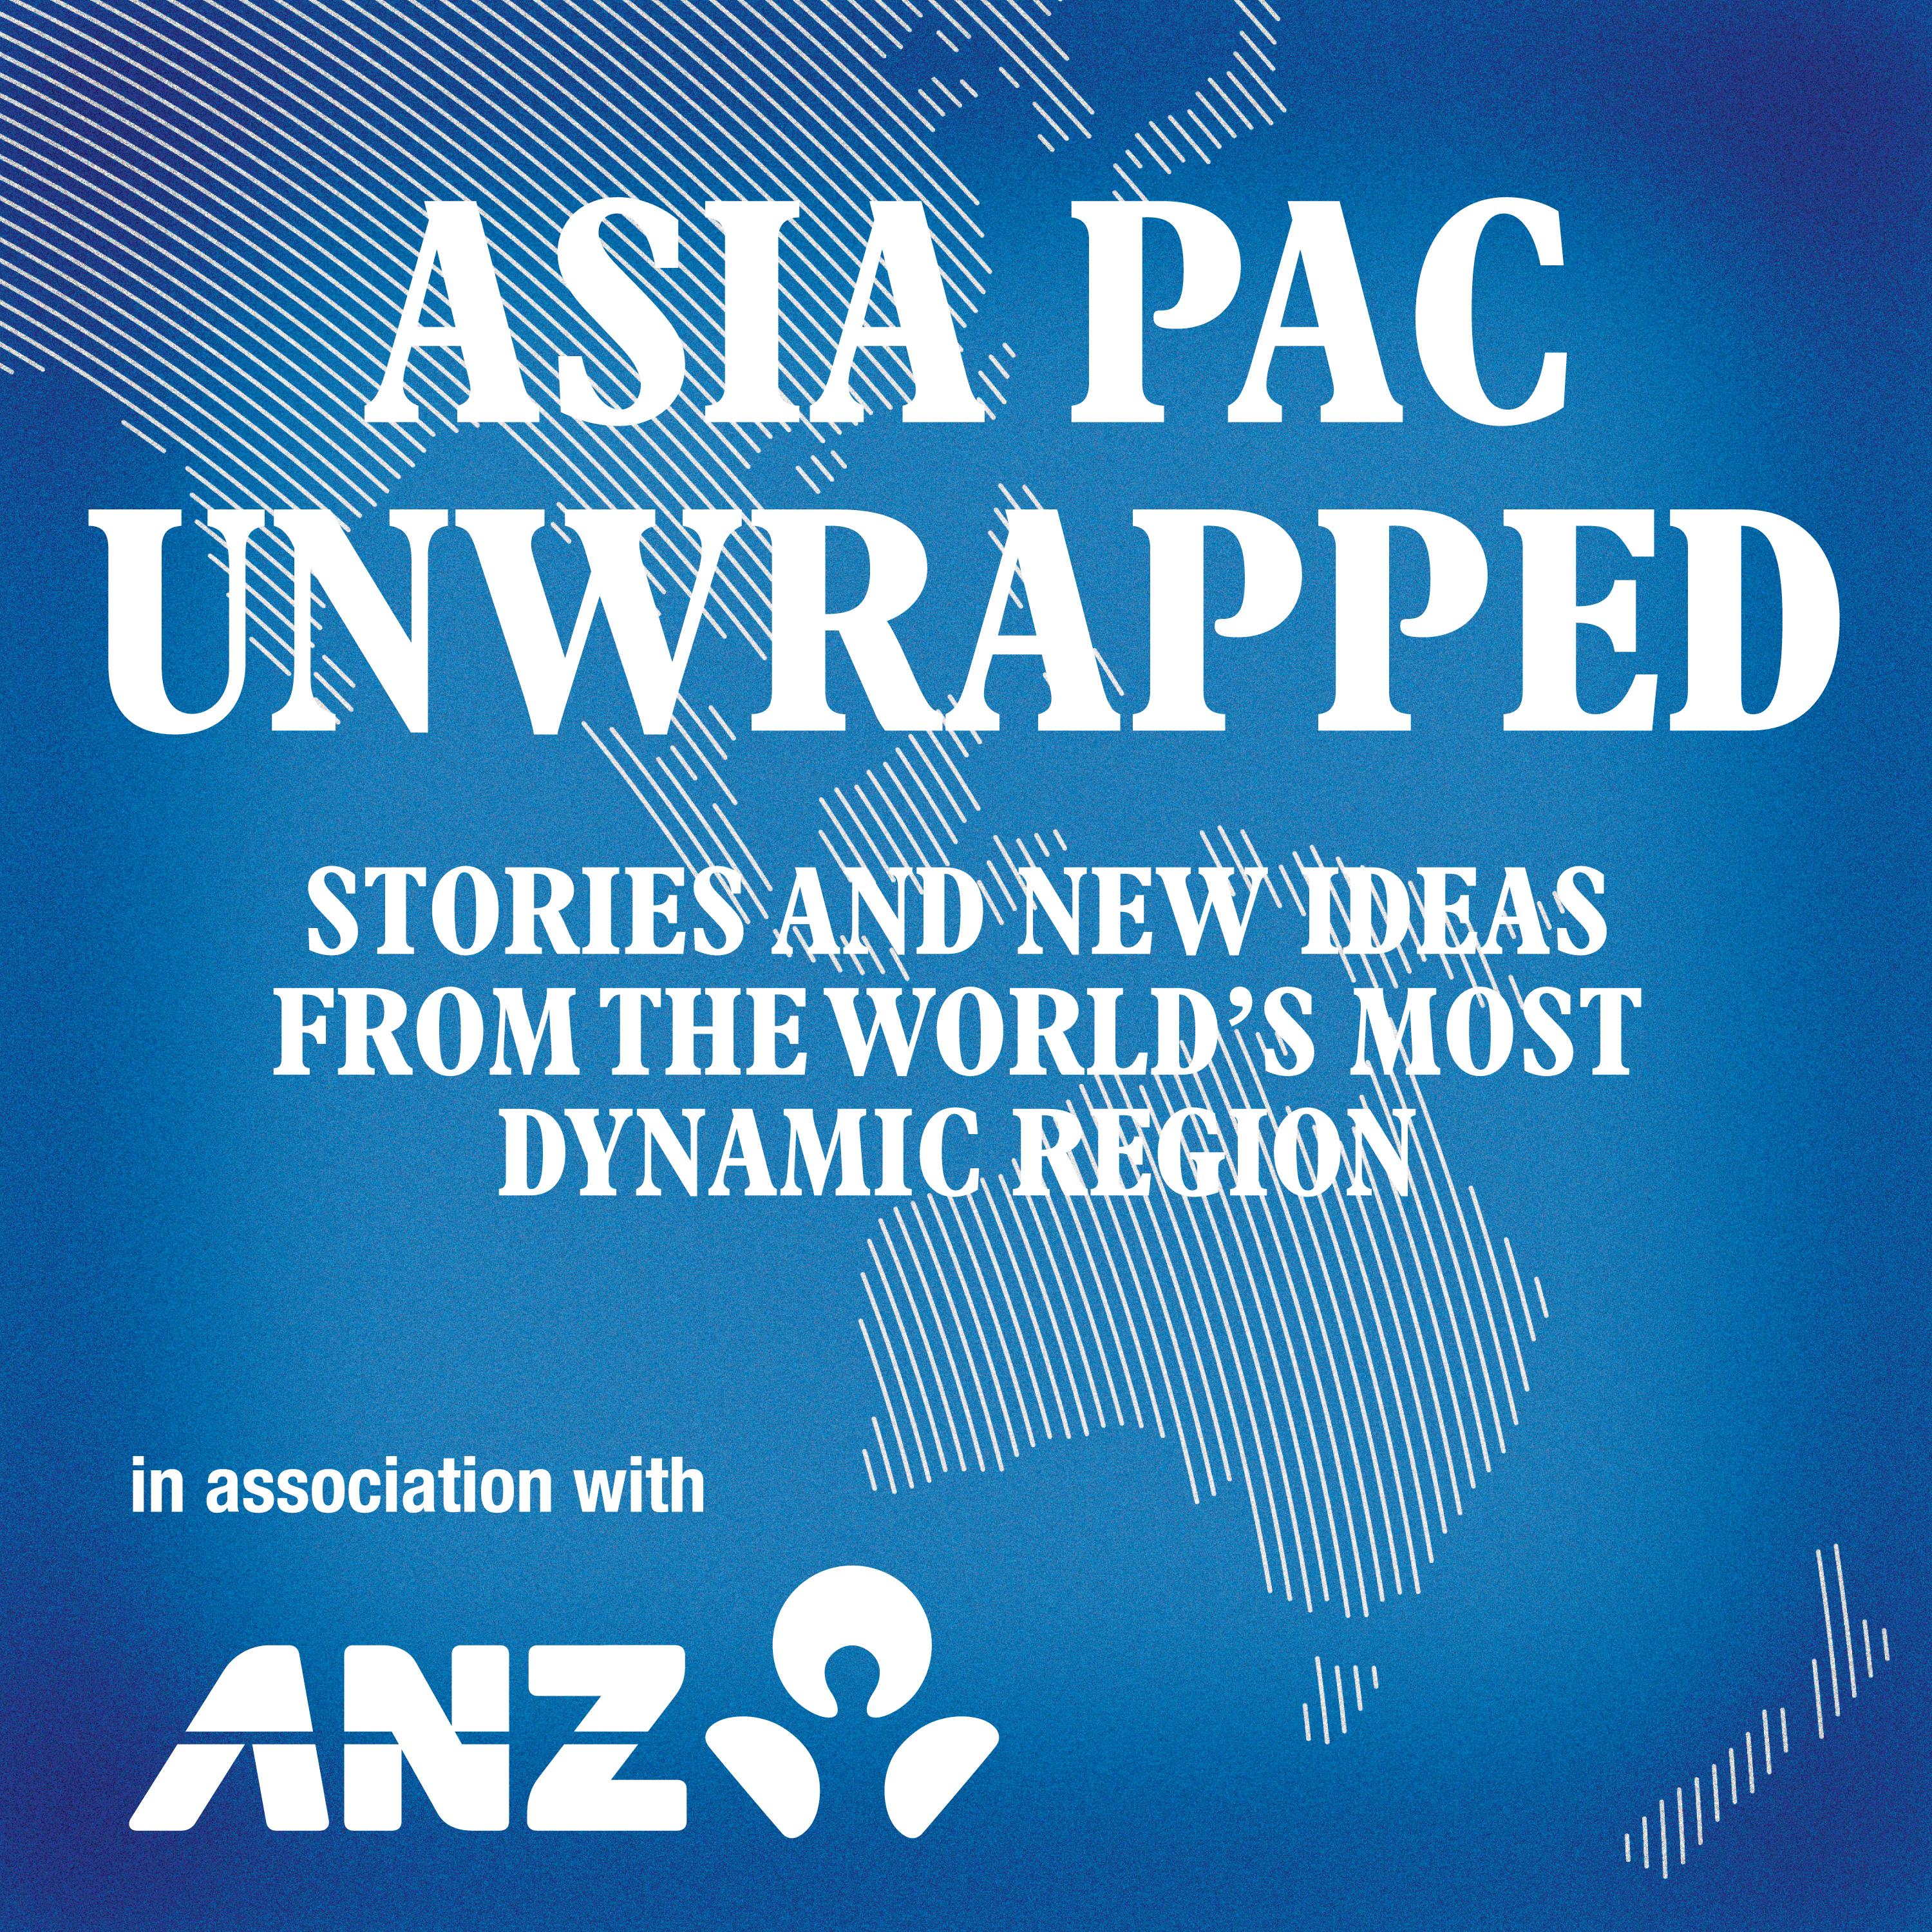 Monocle 24: Asia Pac Unwrapped